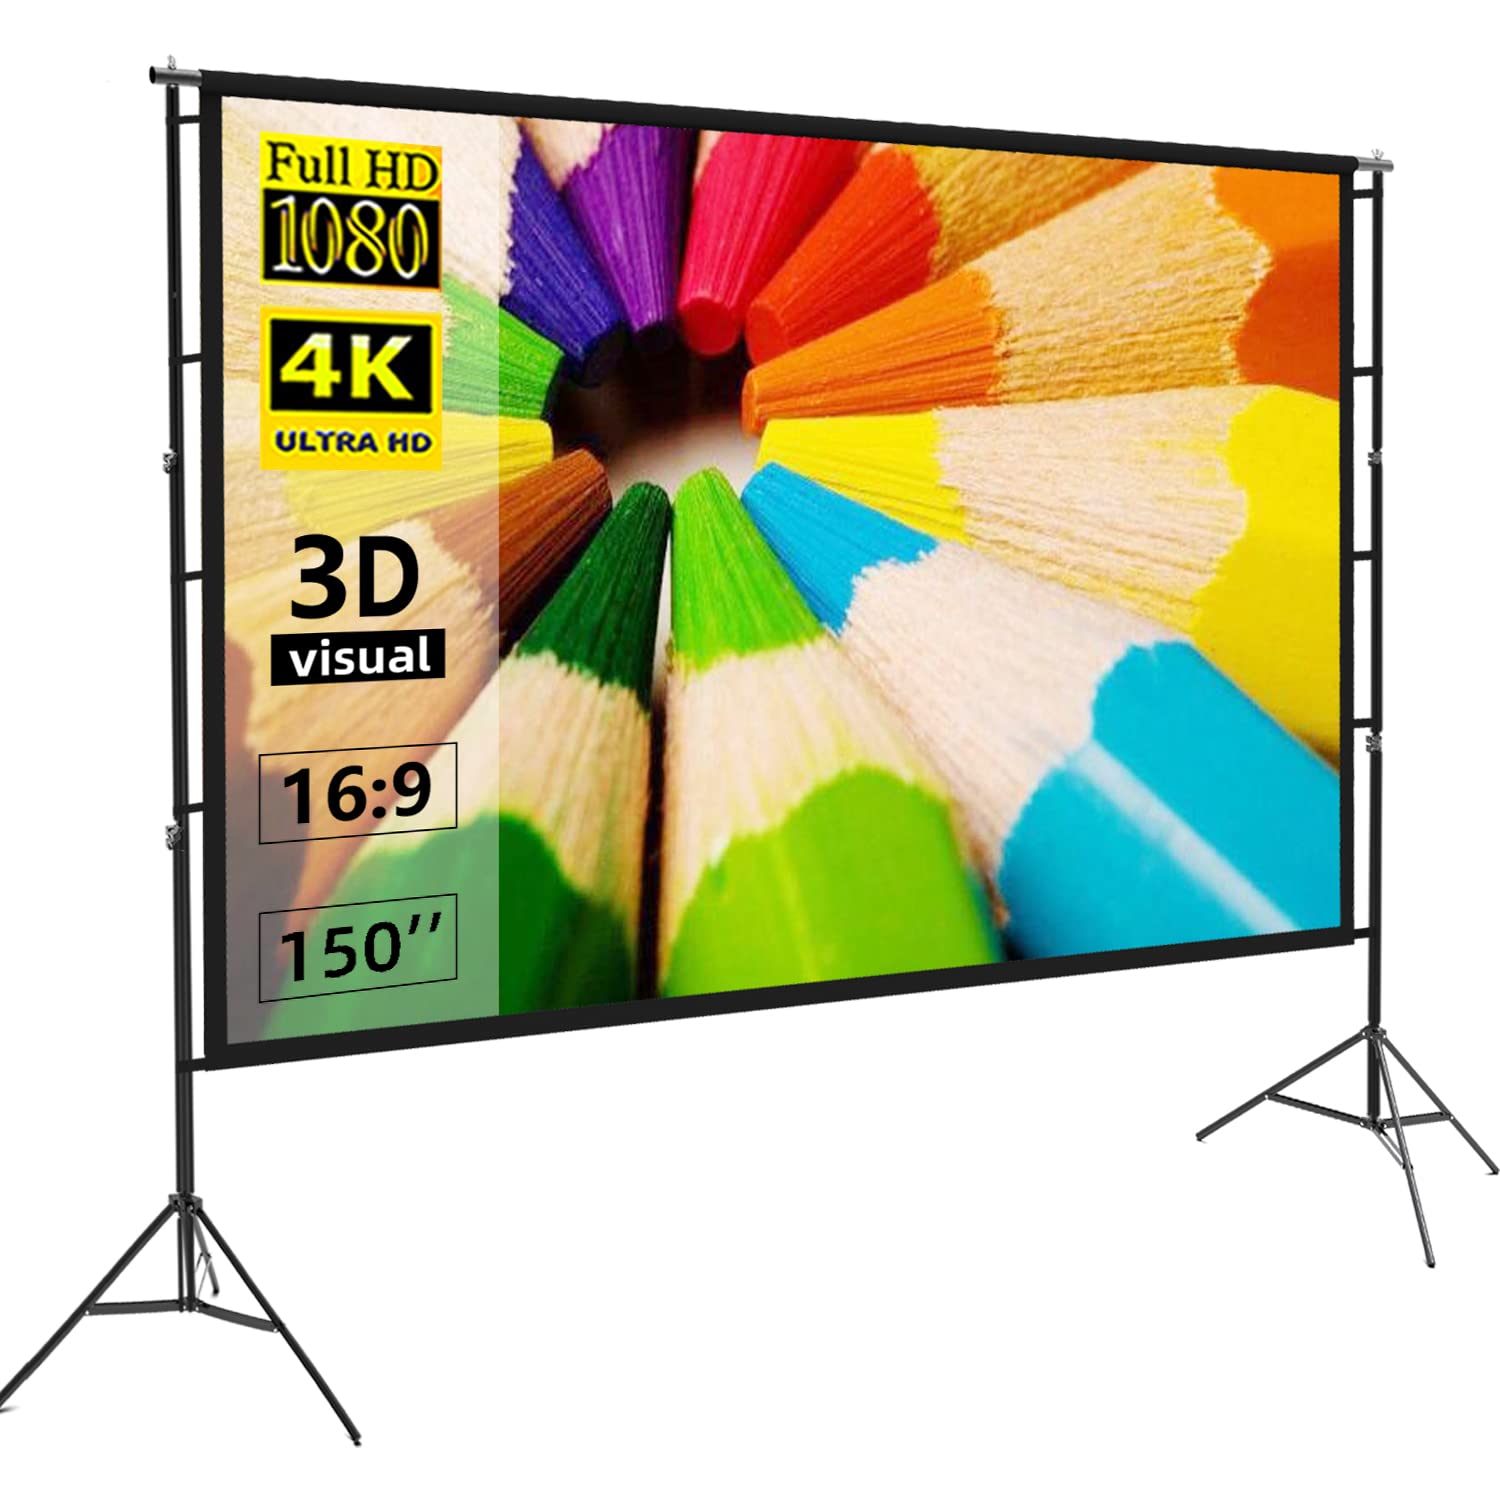 Speed-X Projector Screen 150 Inch Tripod Potable Double Stand 8x10 Feet 4:3MW